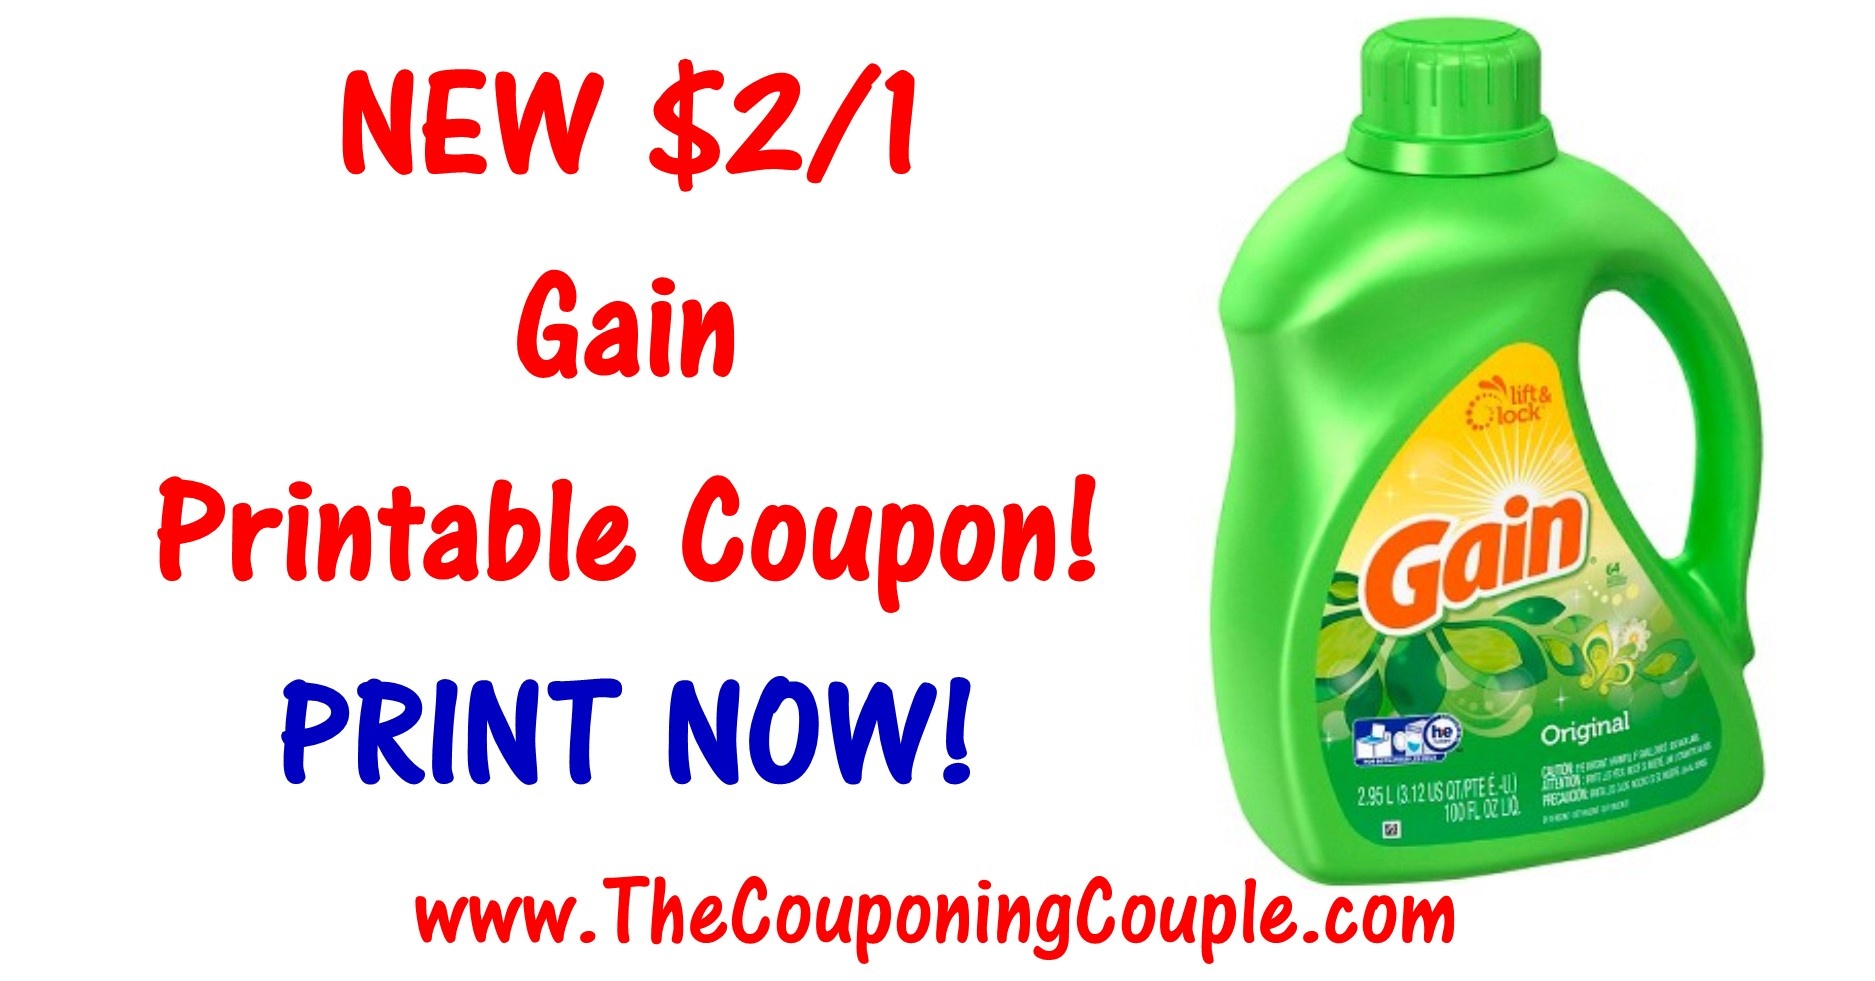 New Gain Printable Coupon ~ Print $2/1 Coupon Now! - Free Printable Gain Laundry Detergent Coupons